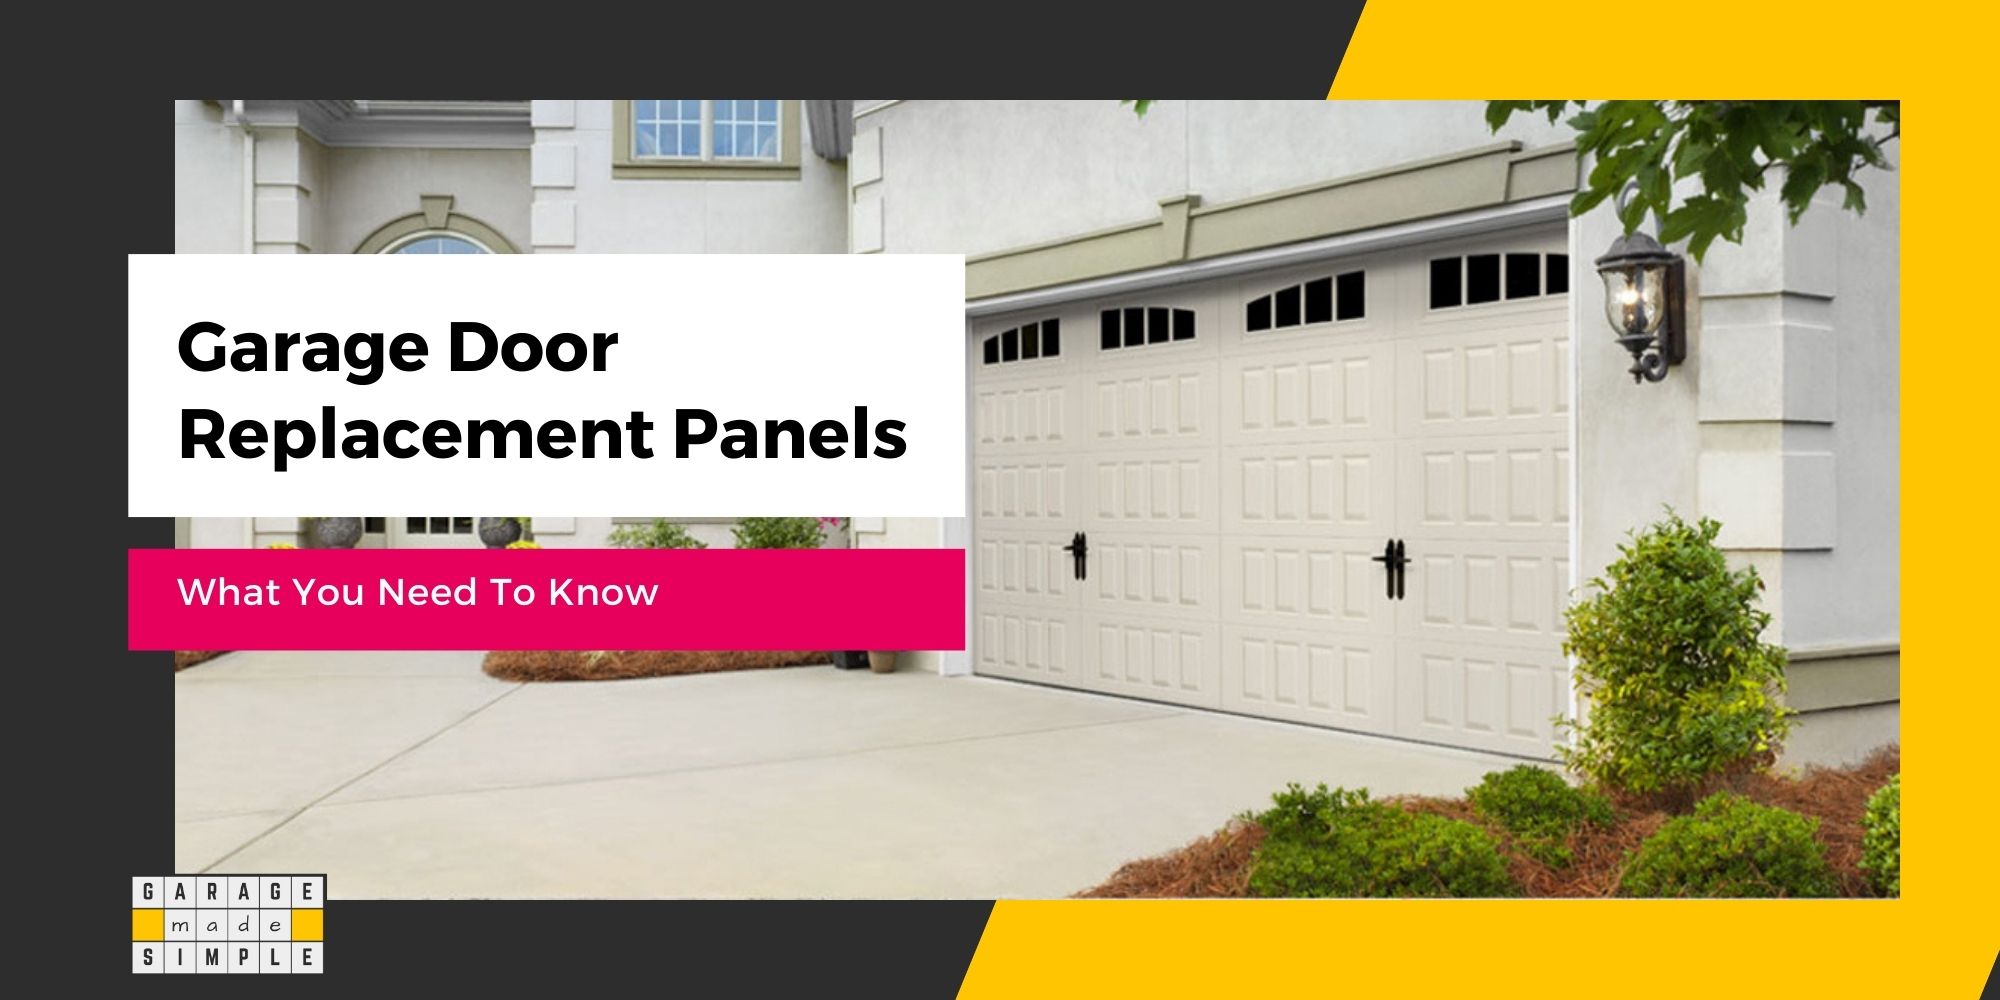 What You Need To Know About Garage Door Replacement Panels